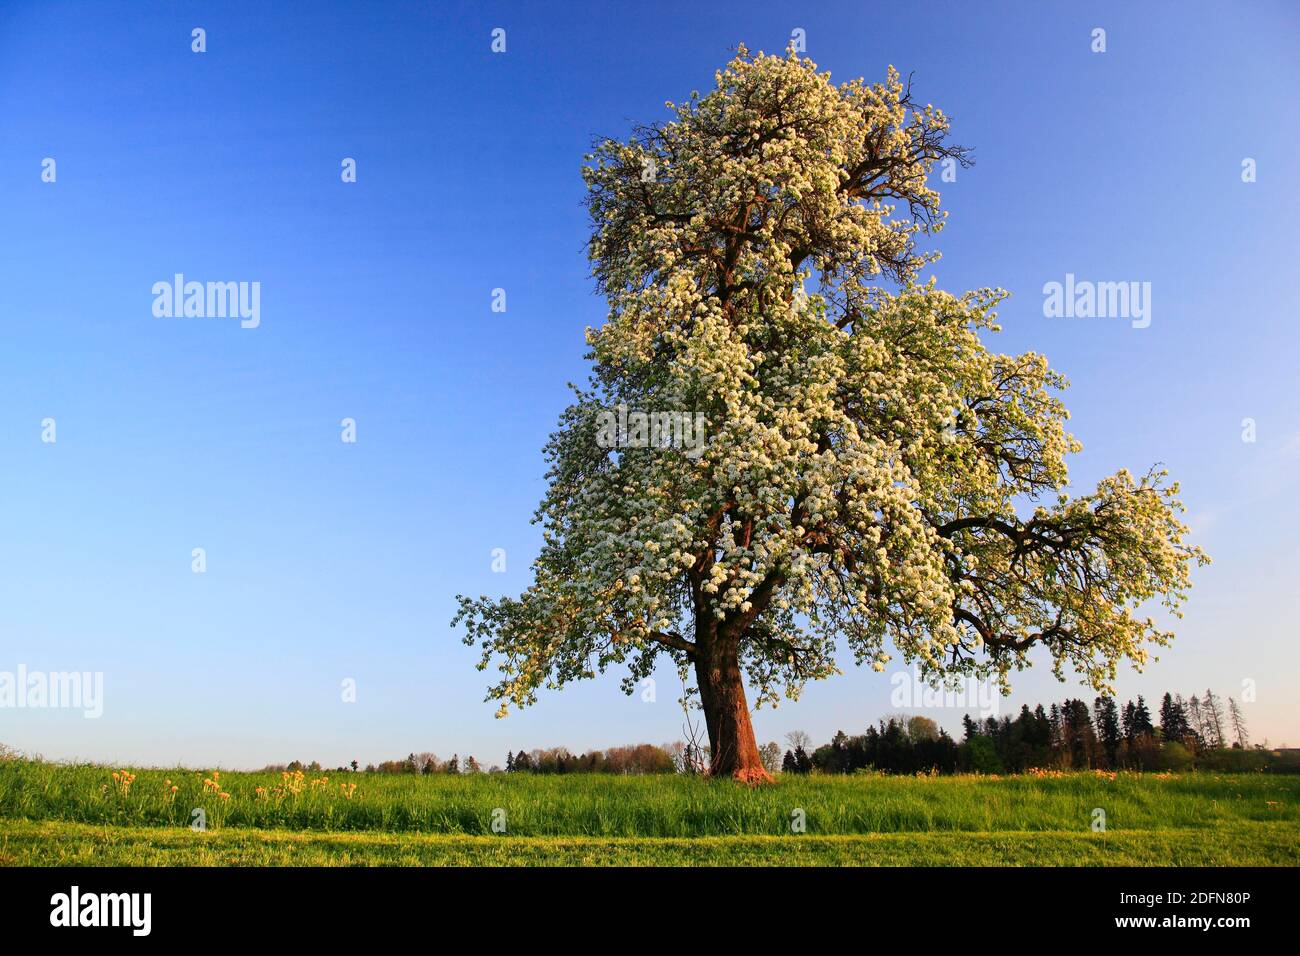 Pear tree in bloom ( Pyrus pyraster) , Pear tree, Switzerland Stock Photo